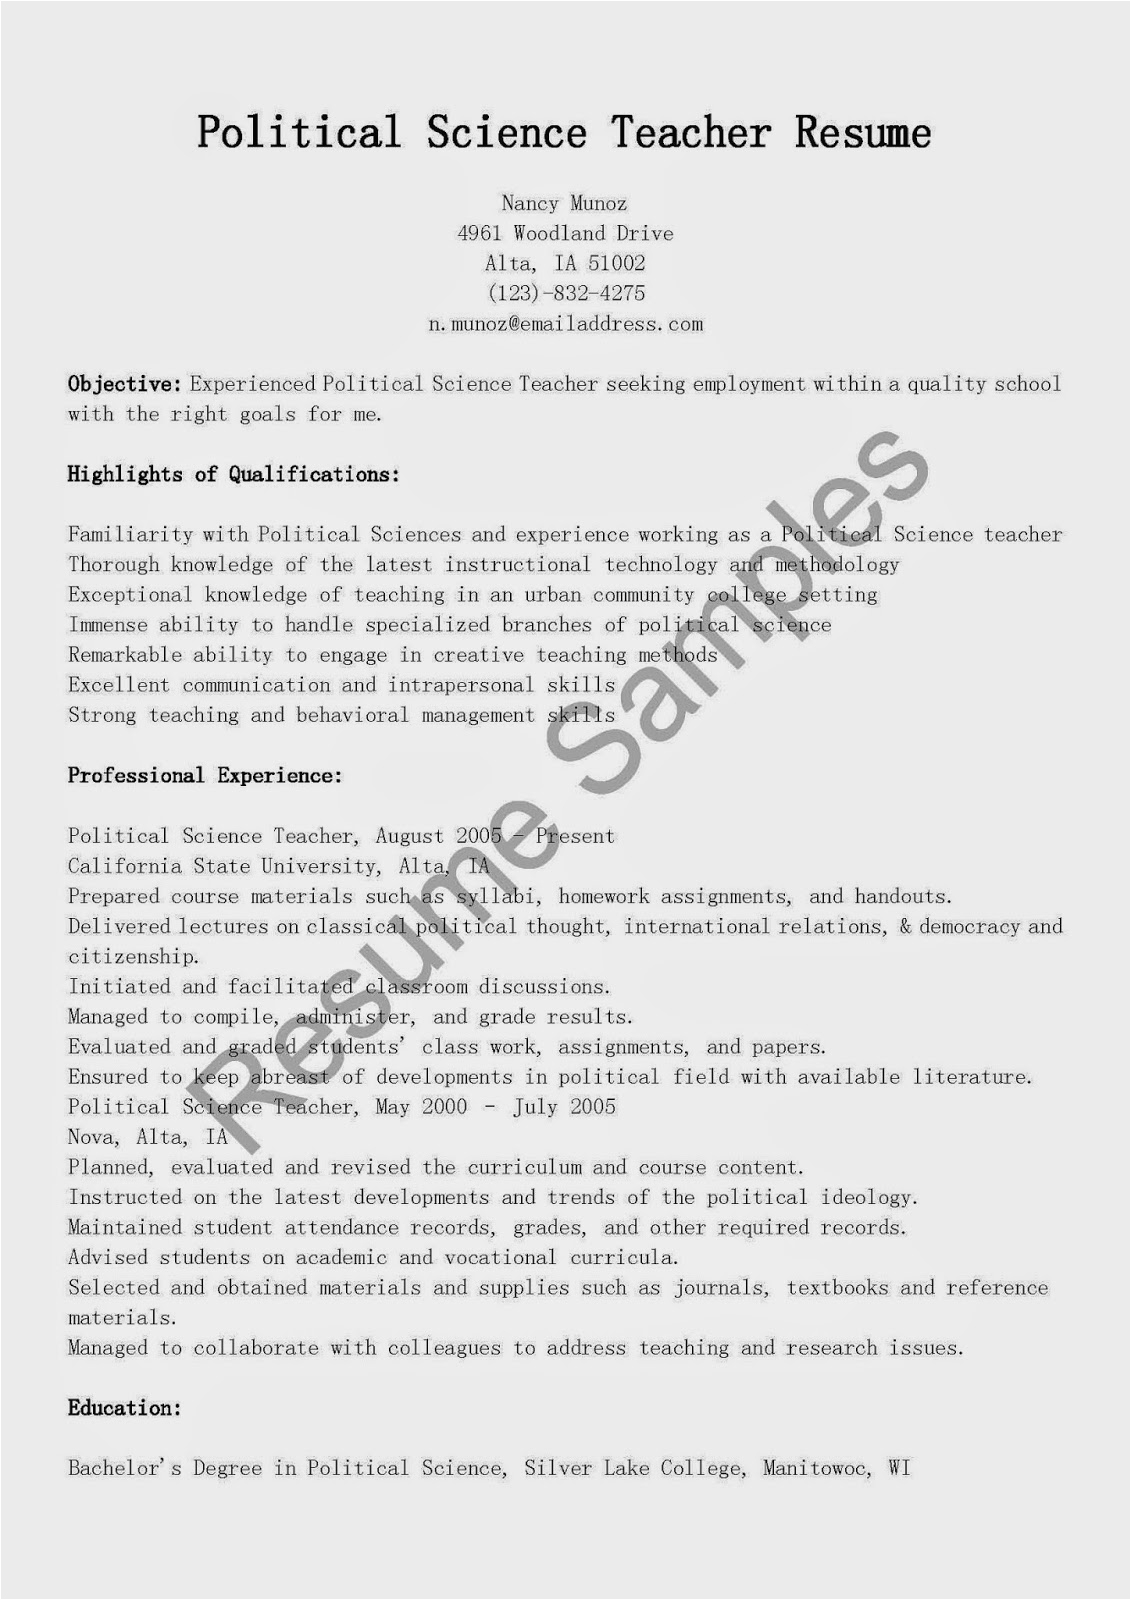 Political Science Sample Resume Wake forest Resume Samples Political Science Teacher Resume Sample